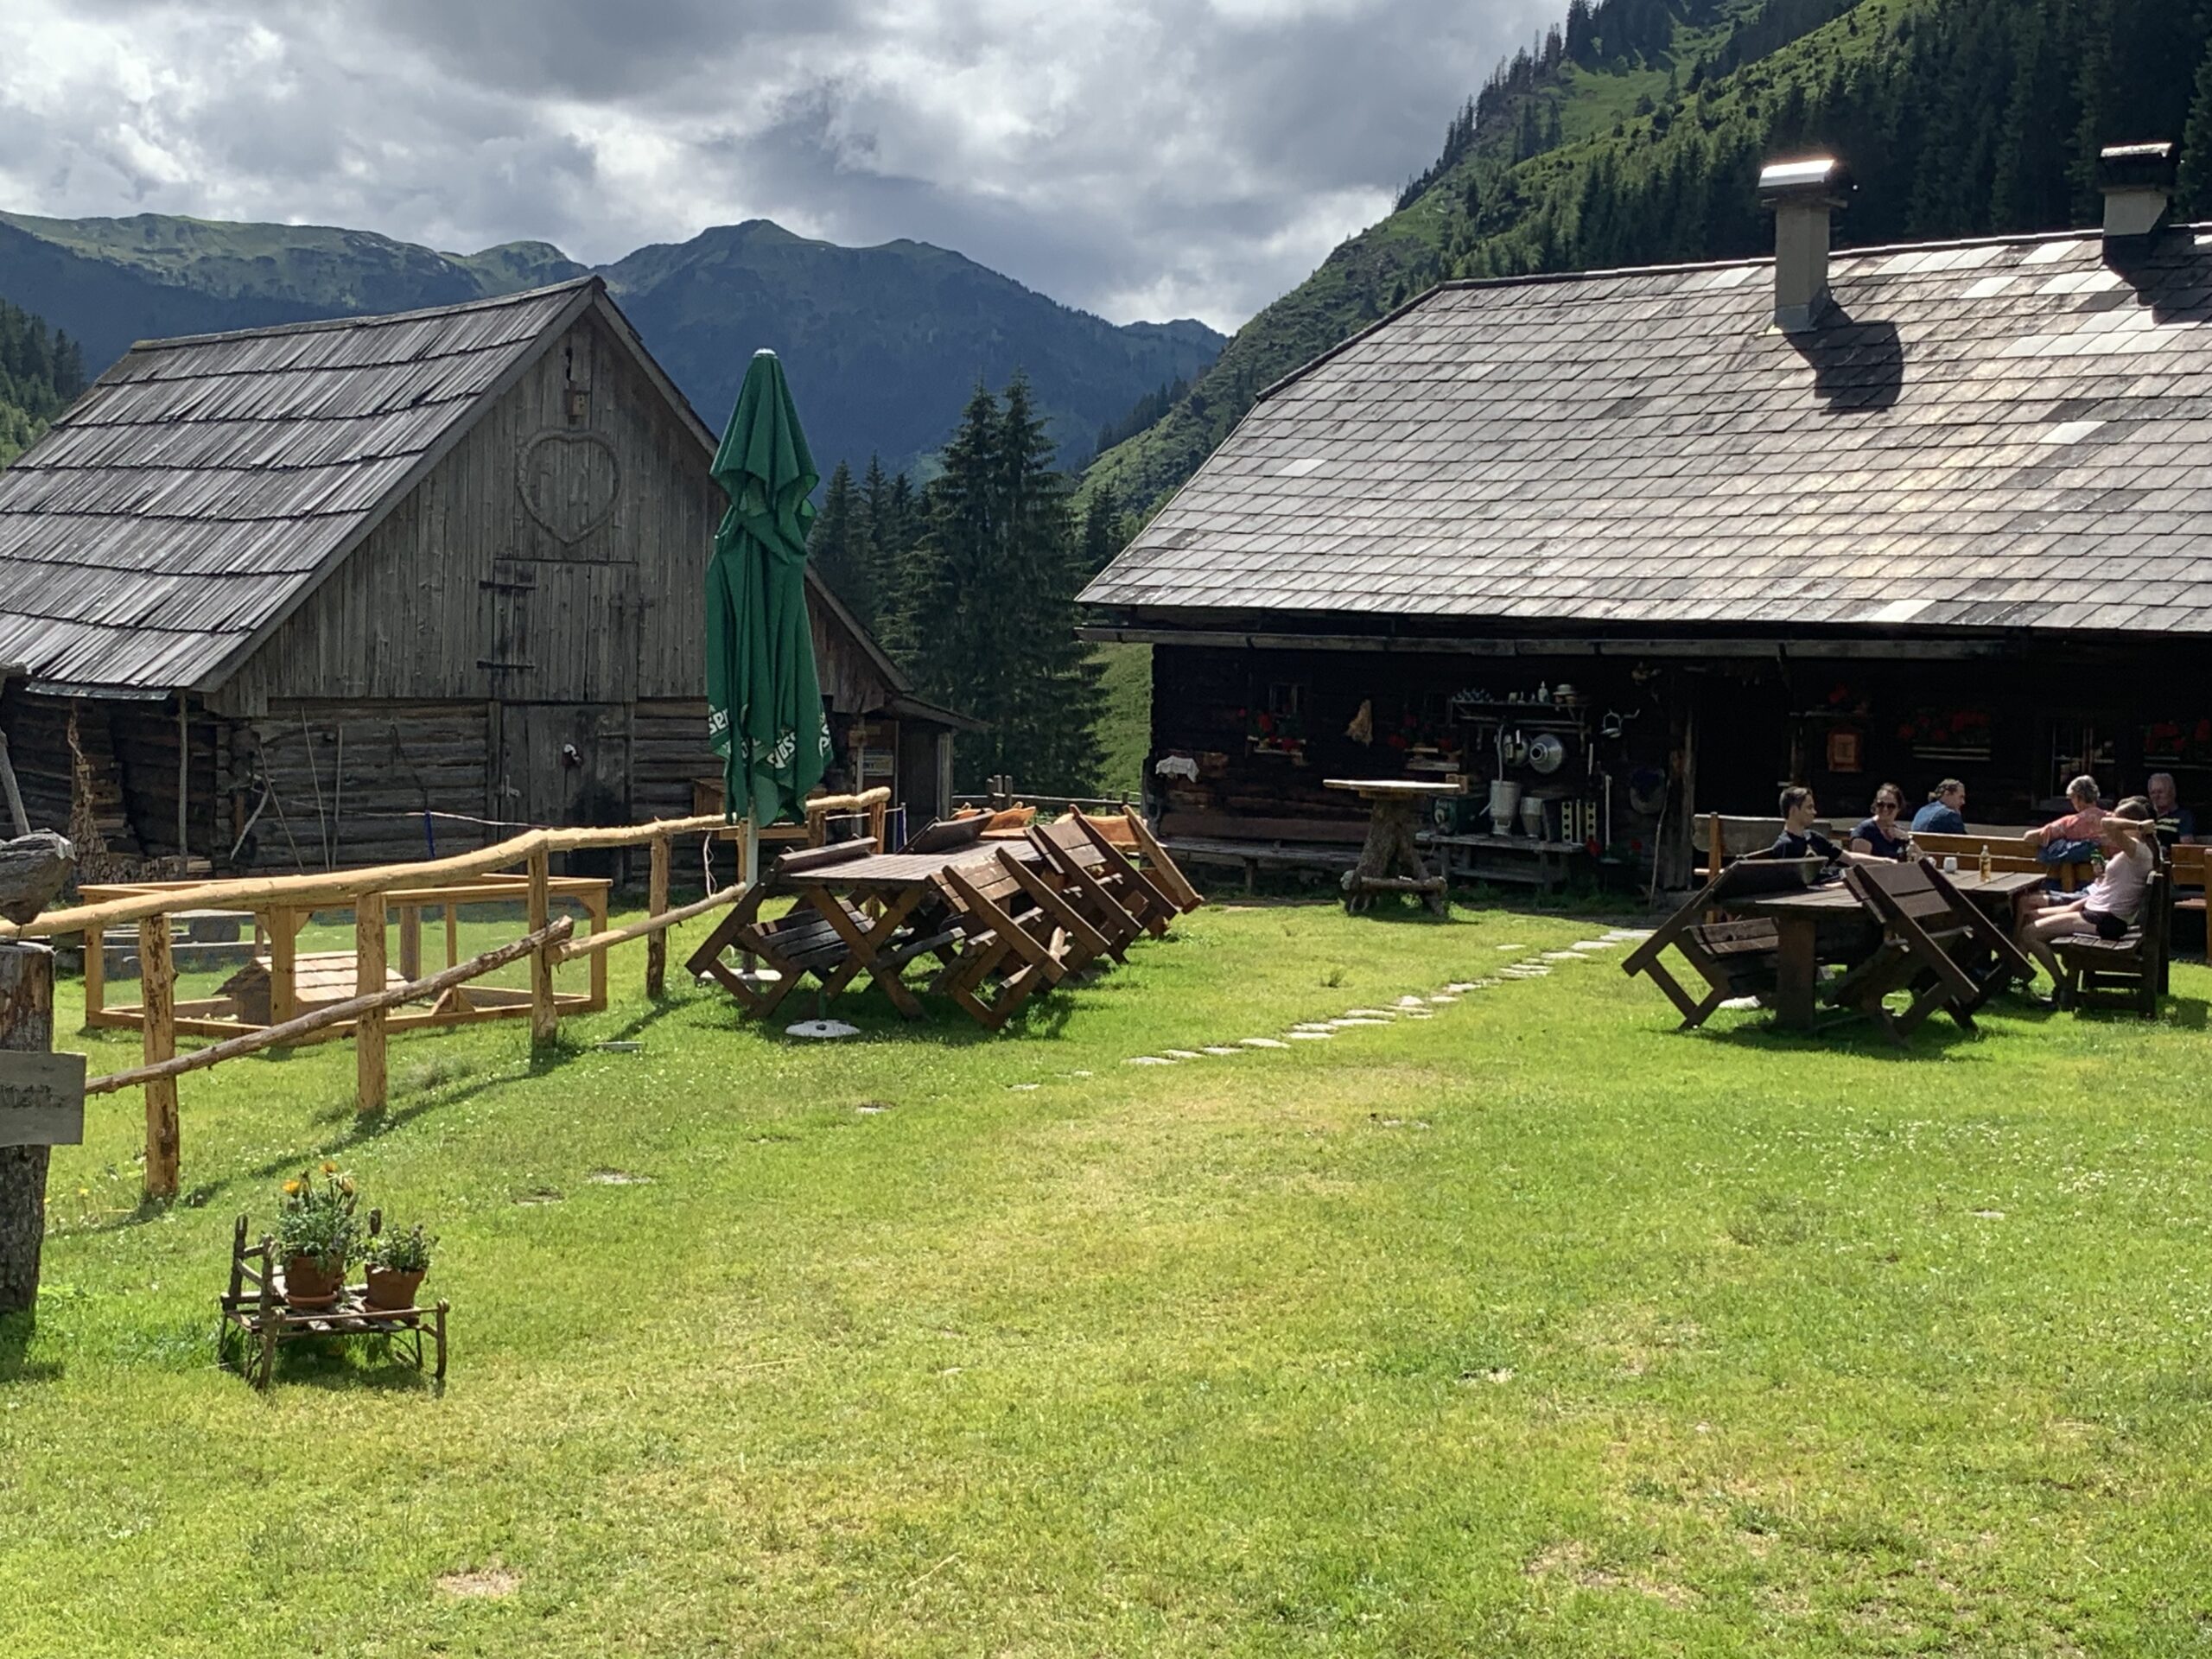 Cooling down on Lärchkar Alm during the summer holidays.